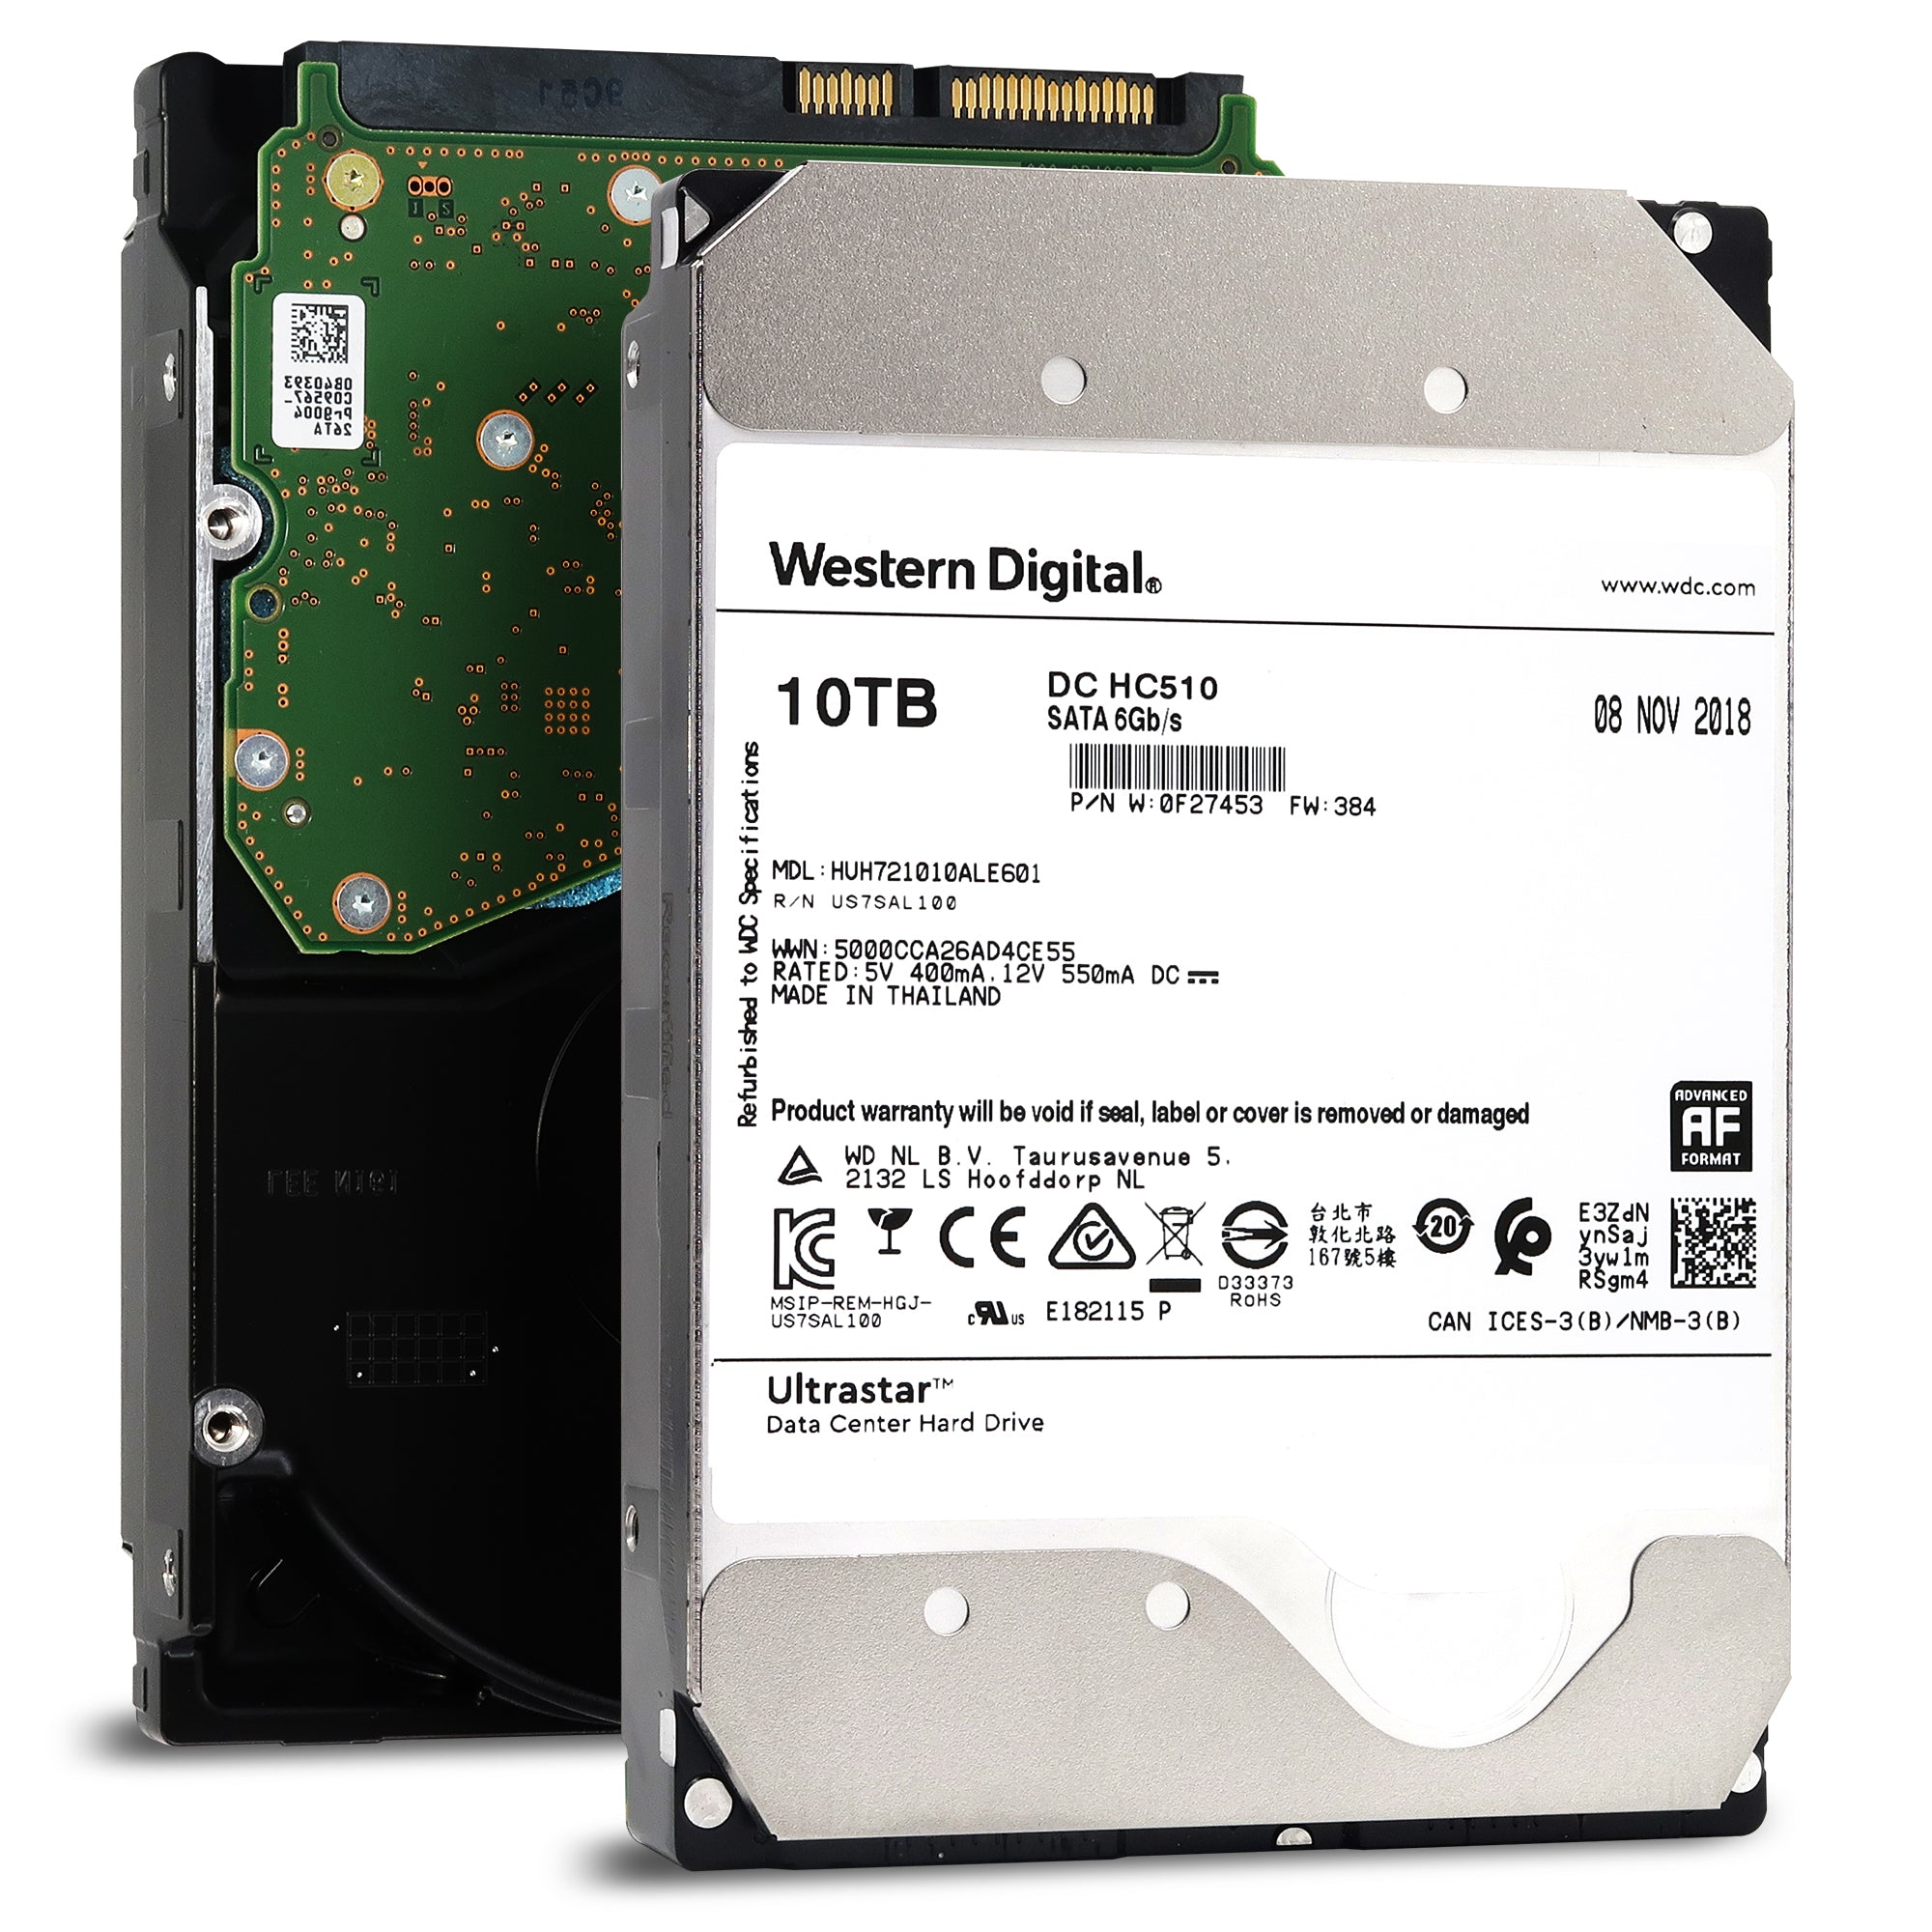 HGST Ultrastar He10 HUH721010ALE601 0F27453 10TB 7.2K RPM SATA 6Gb/s 512e 256MB 3.5" SED Power Disable Pin Manufacturer Recertified HDD